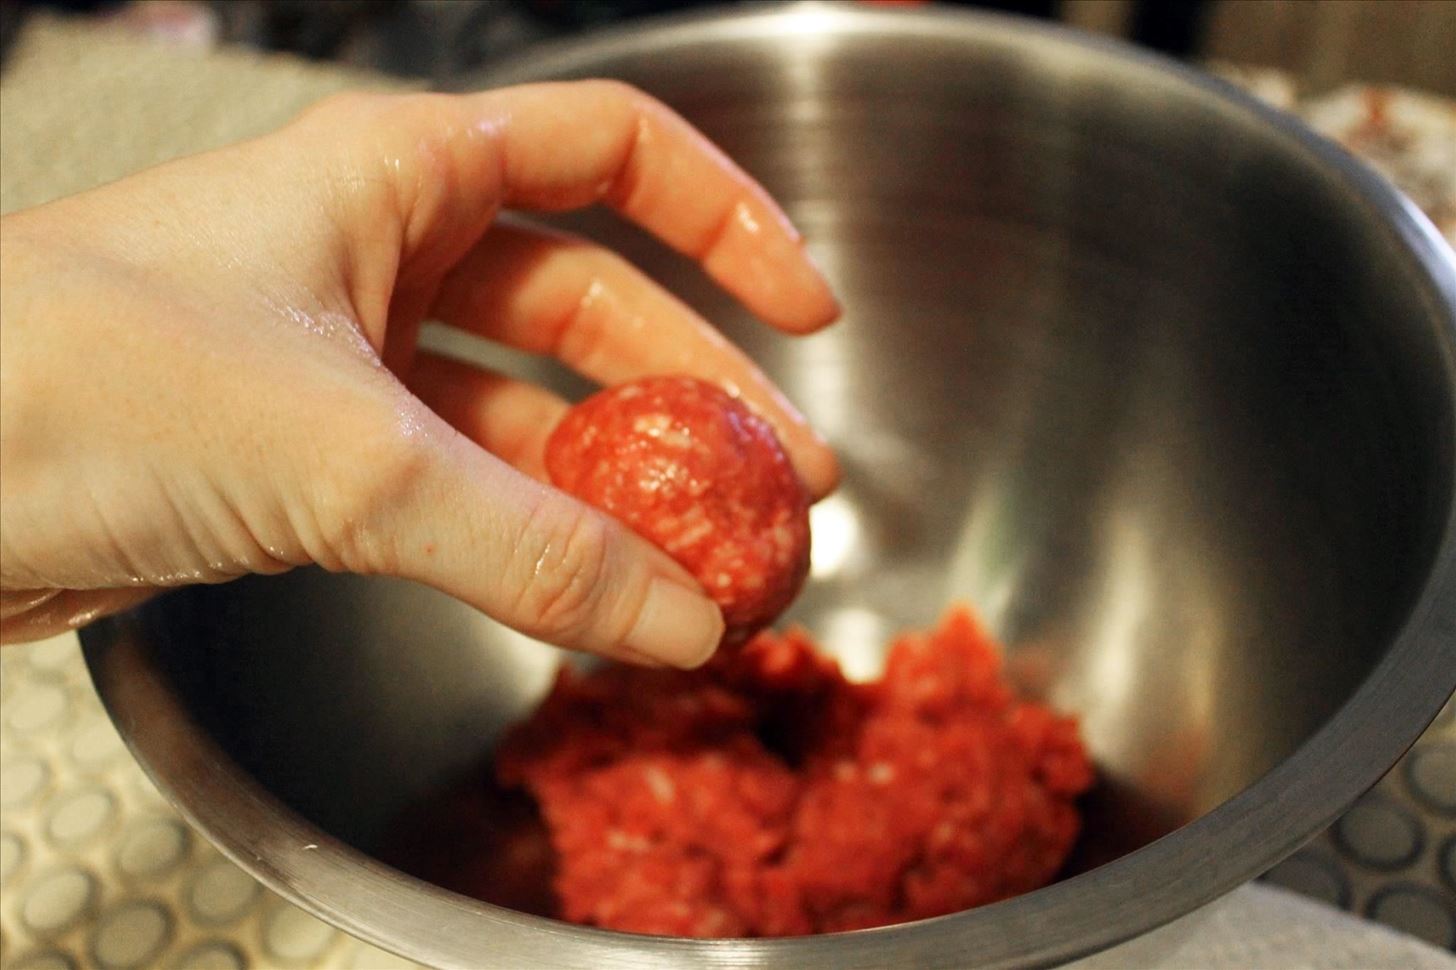 How to Keep Ground Meat from Sticking to Your Hands